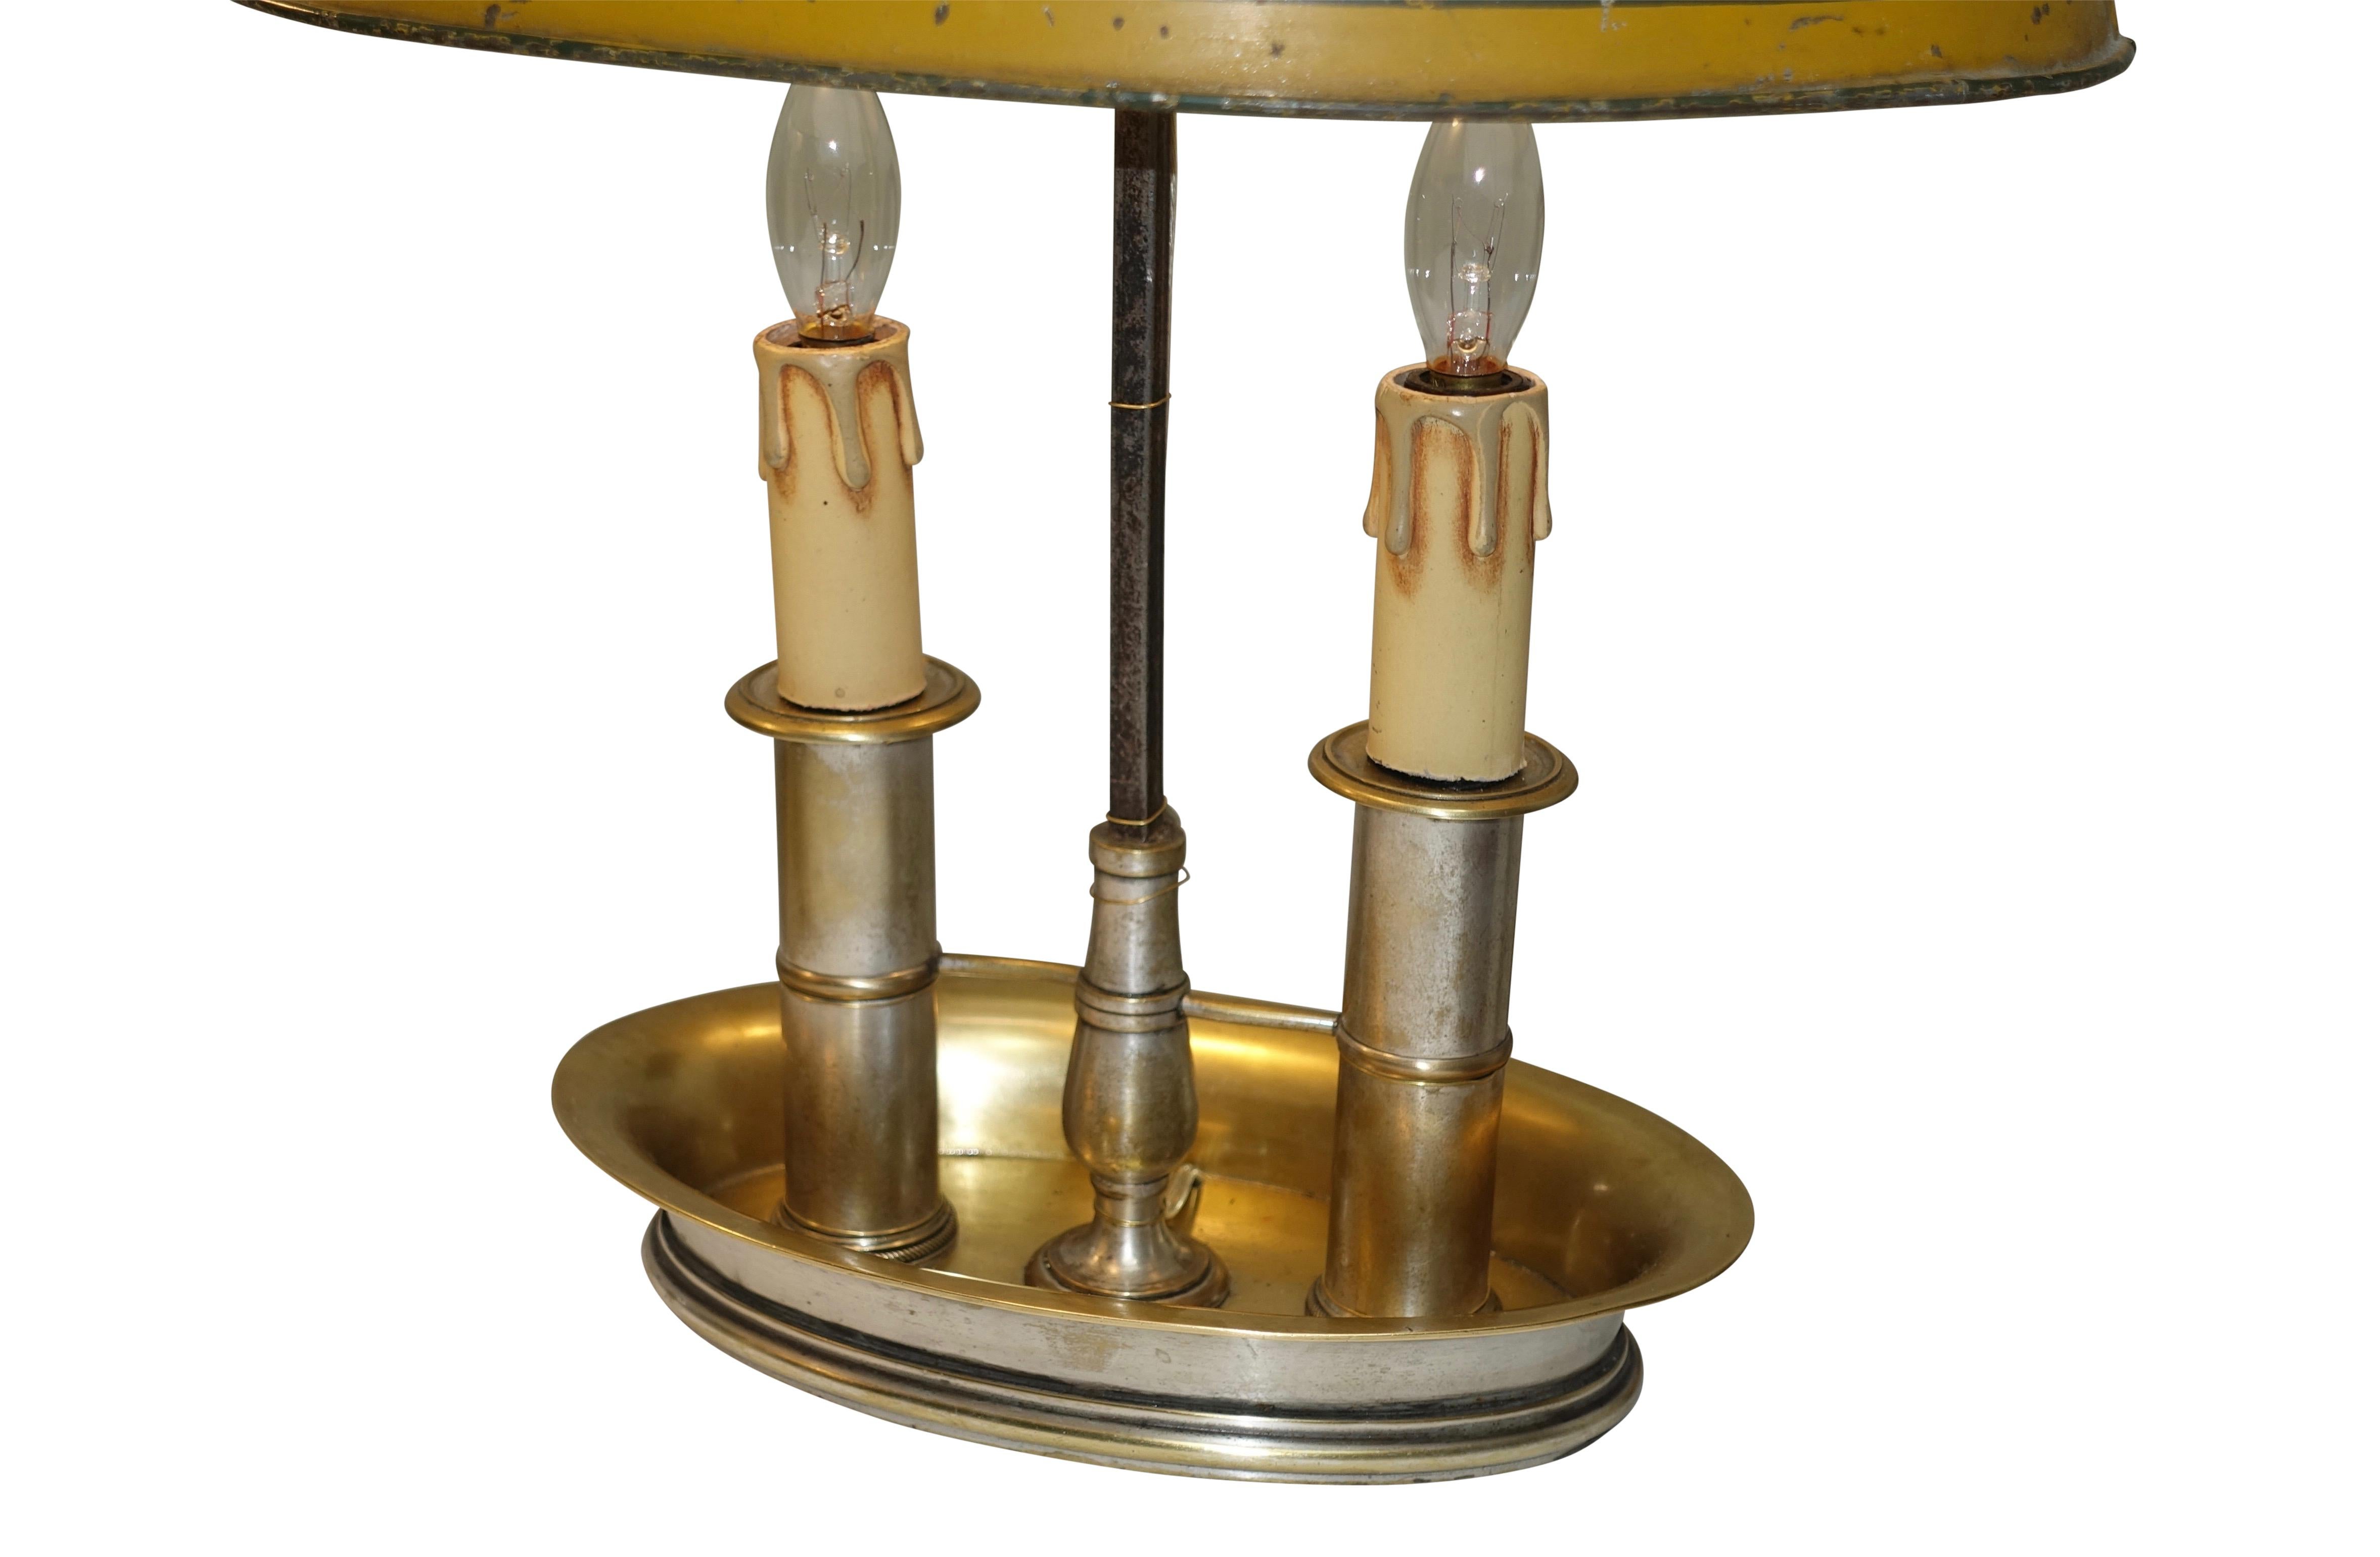 Pair of Brass Bouilotte Lamps with Yellow Tole Shades, French Early 19th Century (Französisch)